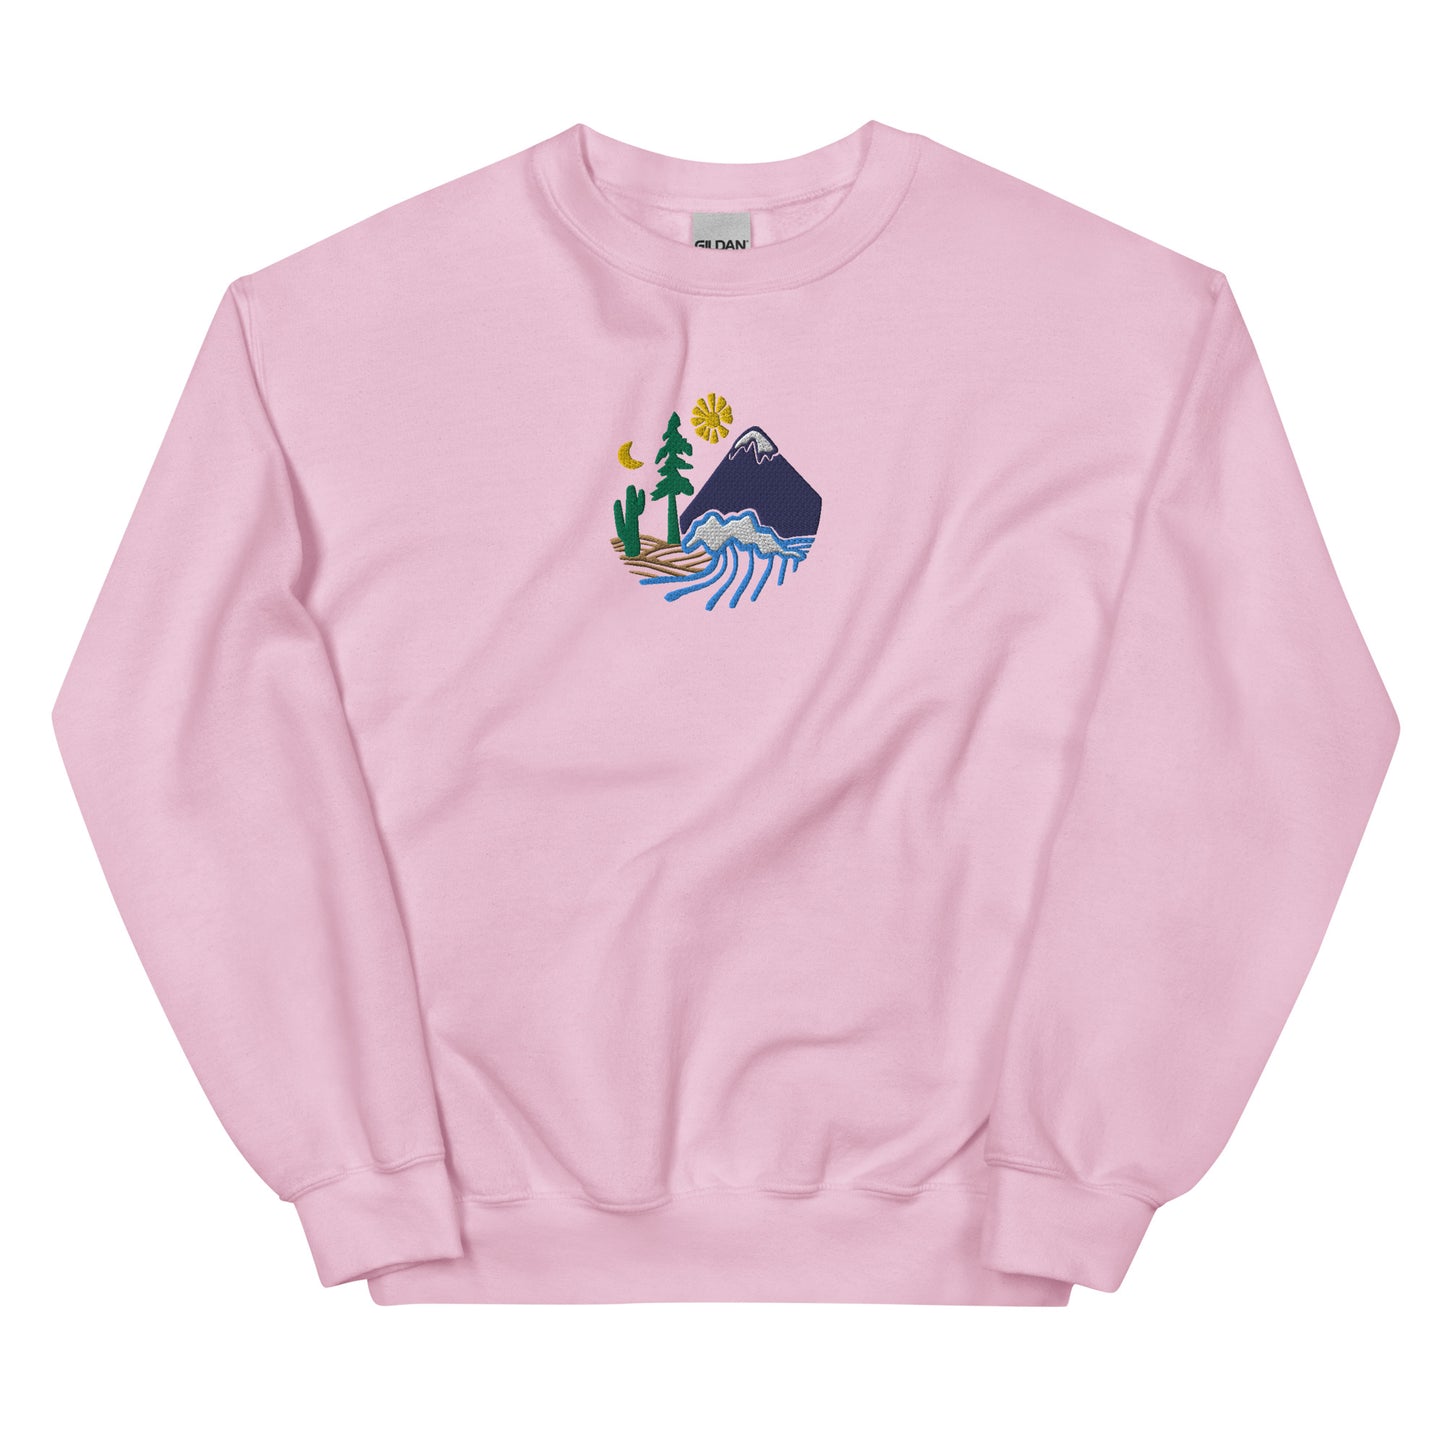 unearthed colored logo sweatshirt